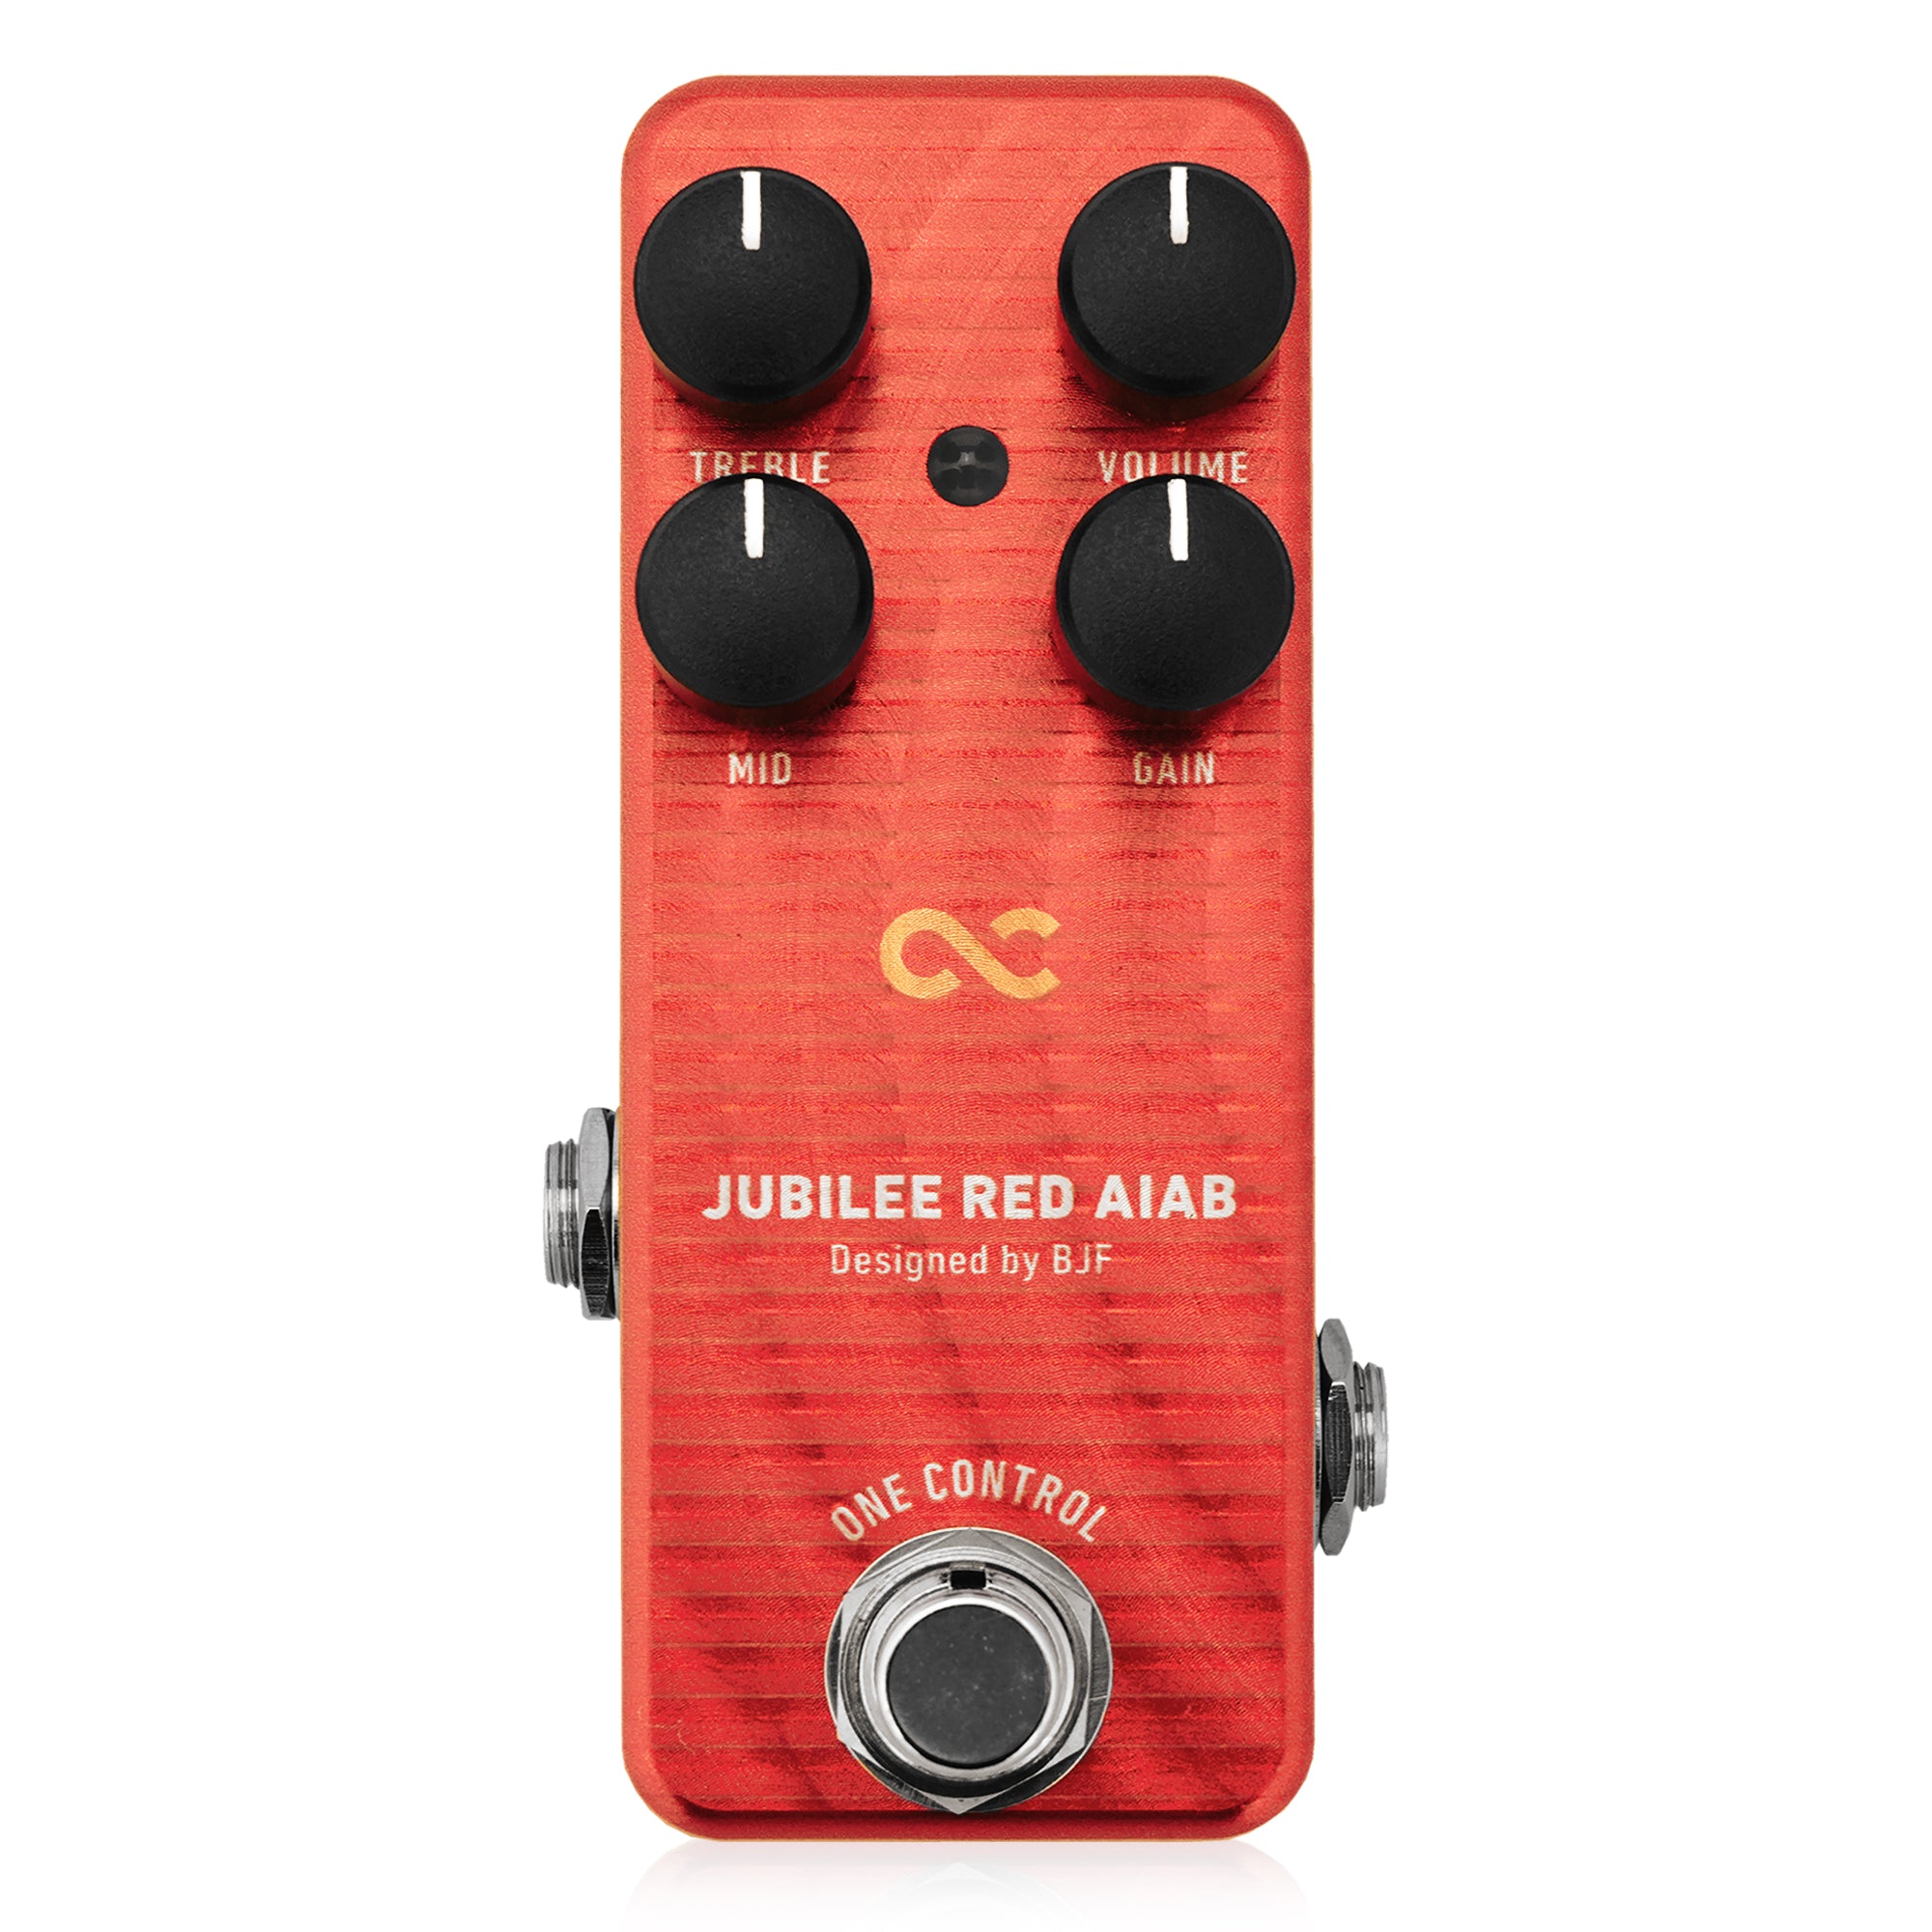 One Control BJF Jubilee Red AIAB